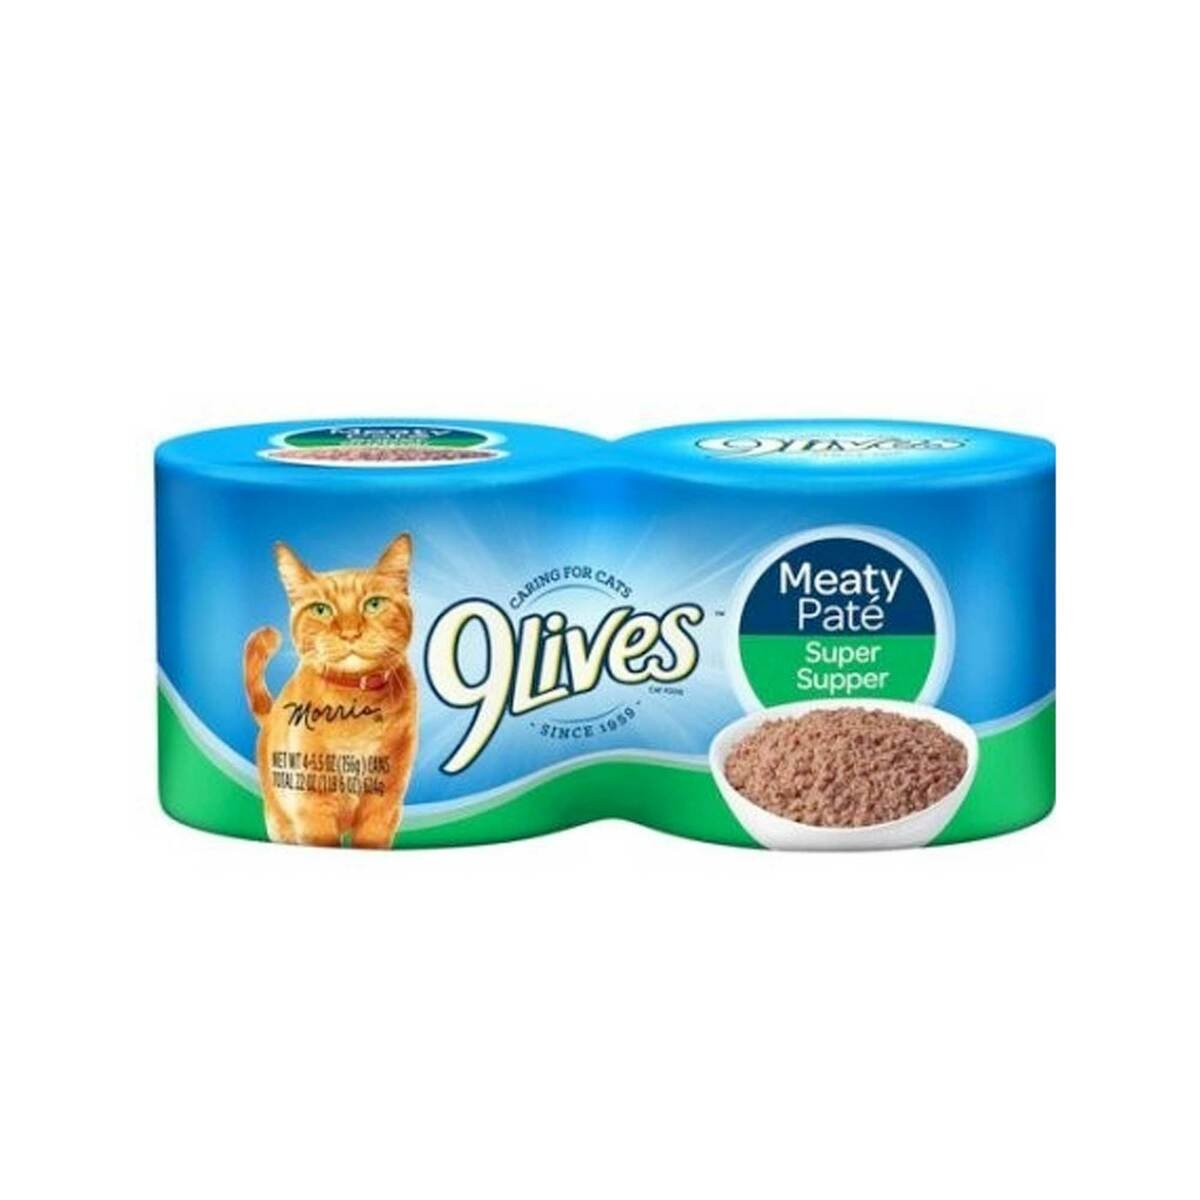 9 Lives Meaty Pate With Chicken 624 g